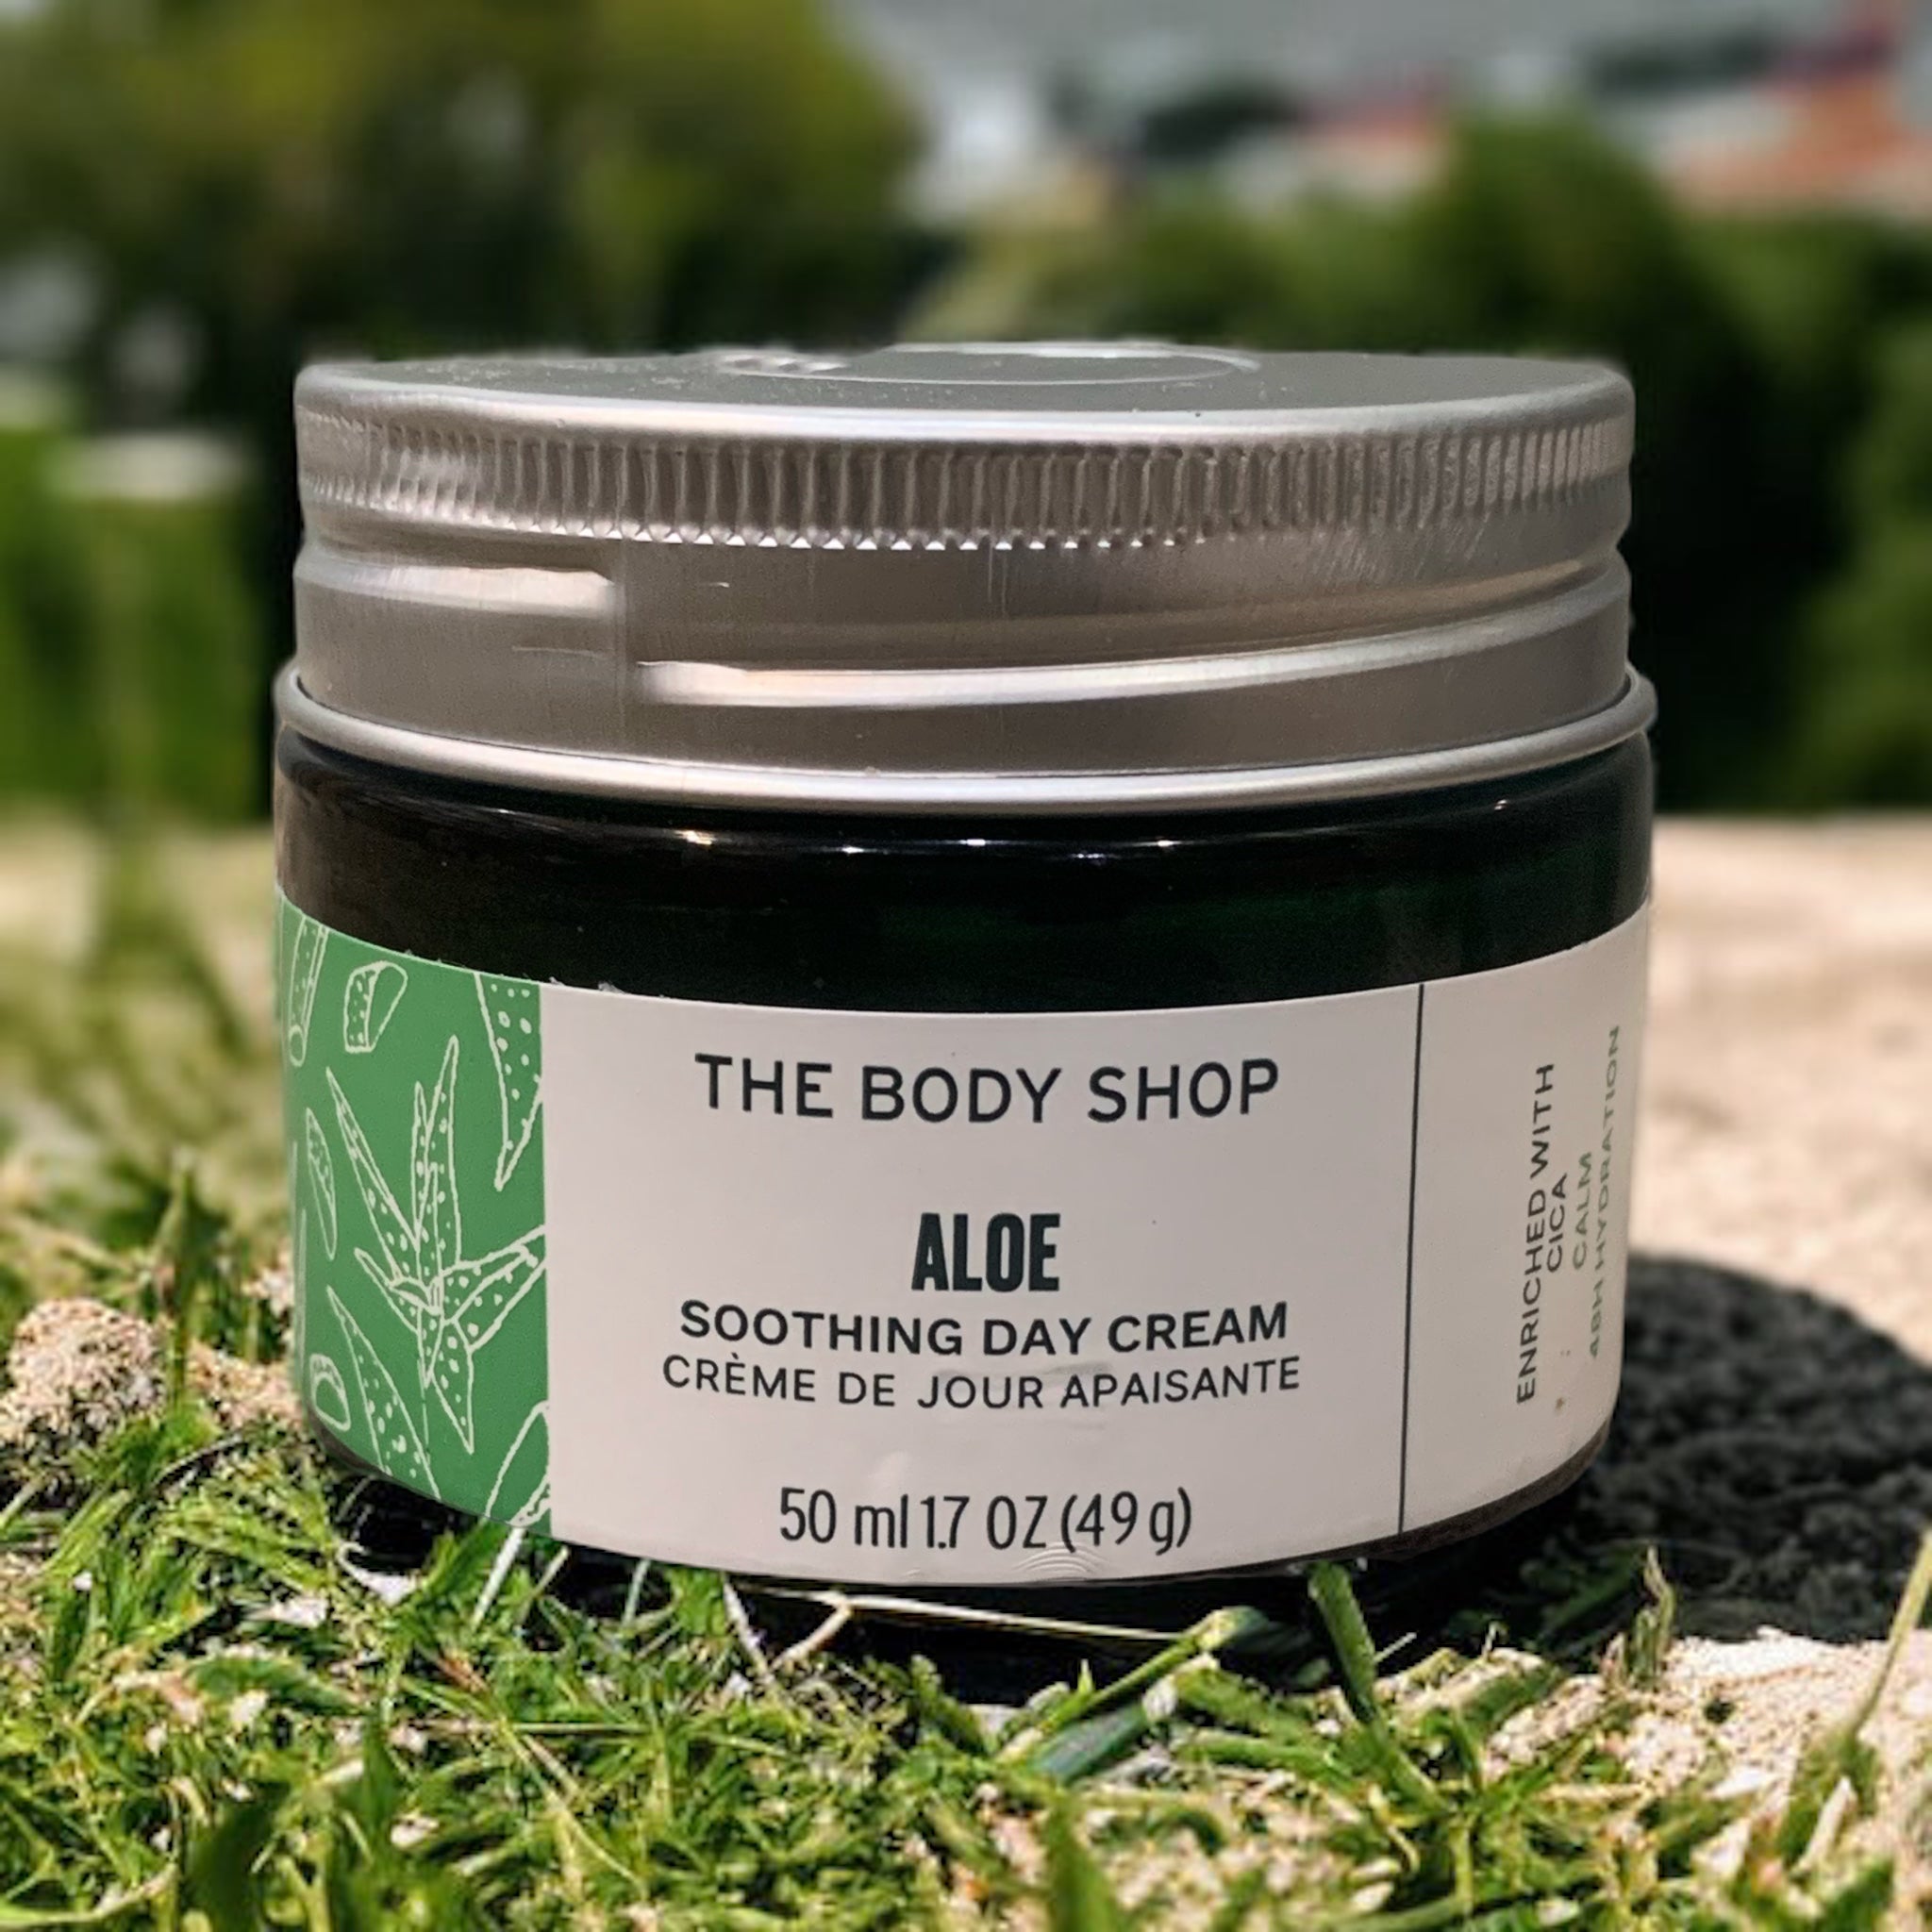 THE BODY SHOP ALOE SOOTHING DAY CREAM